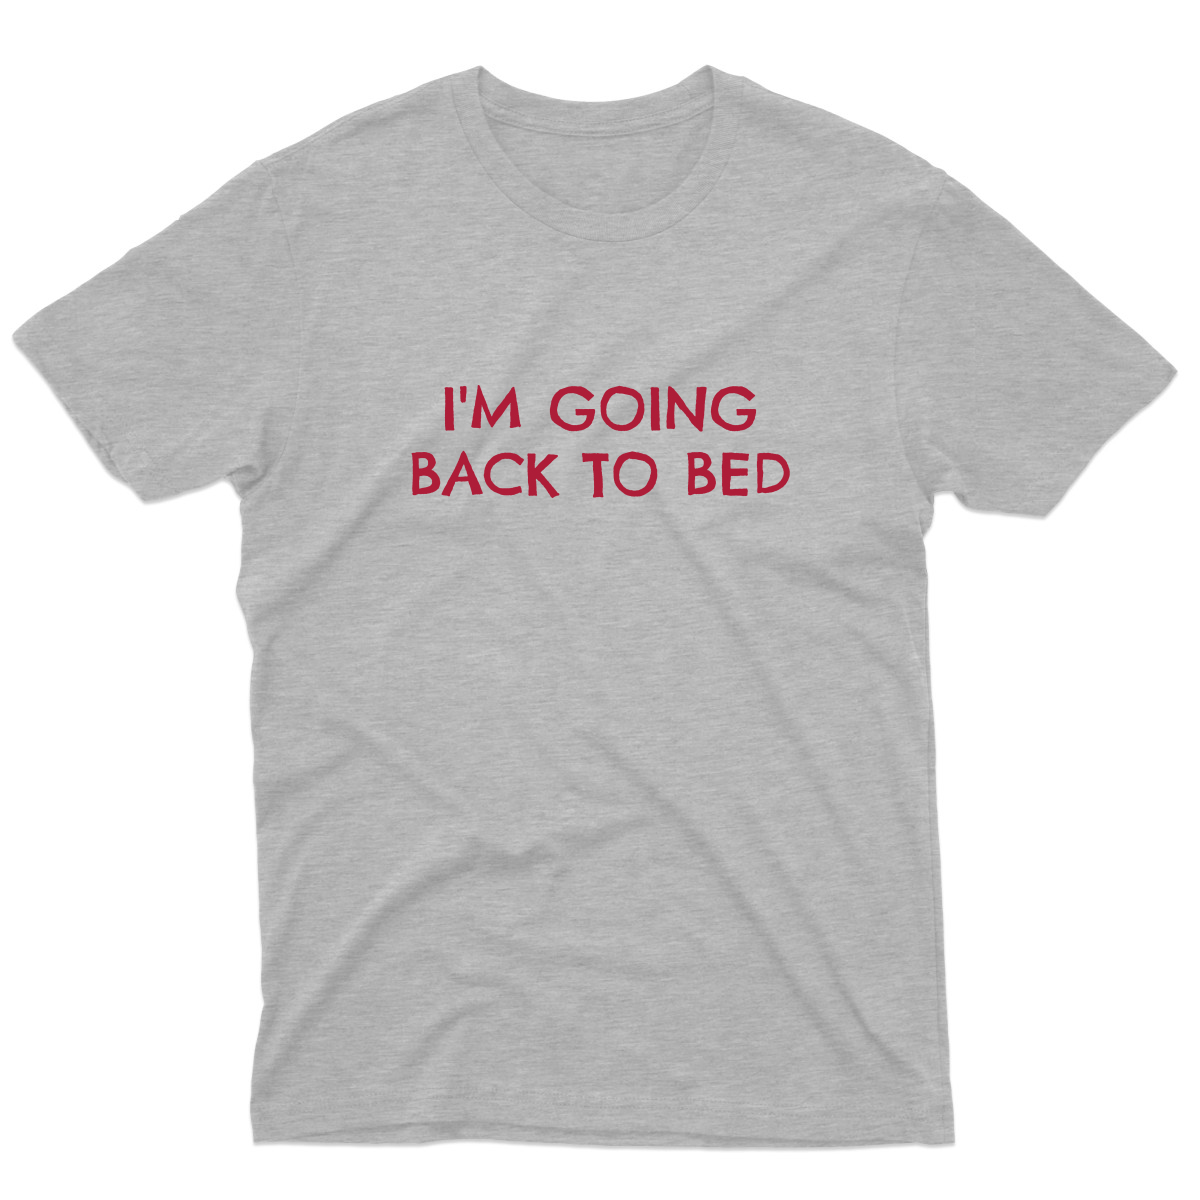 I'm Going Back to Bed Men's T-shirt | Gray